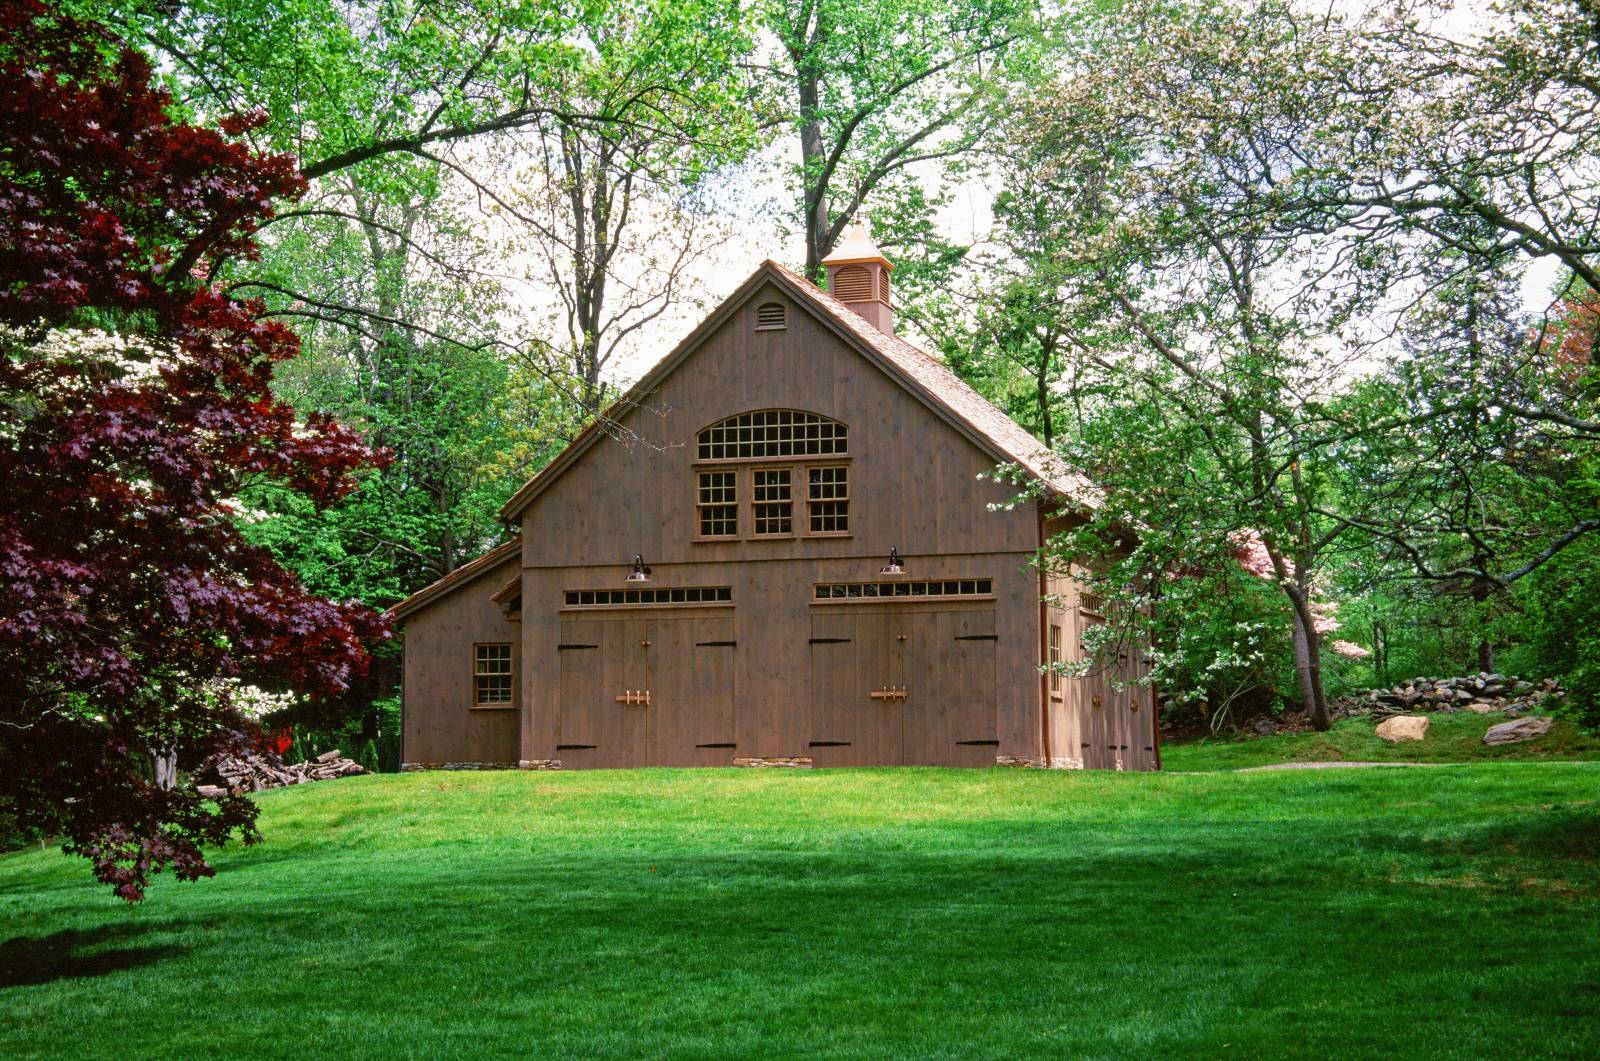 26' x 32' Carriage Barn with 10' x 24' Lean-To (Fairfield CT)